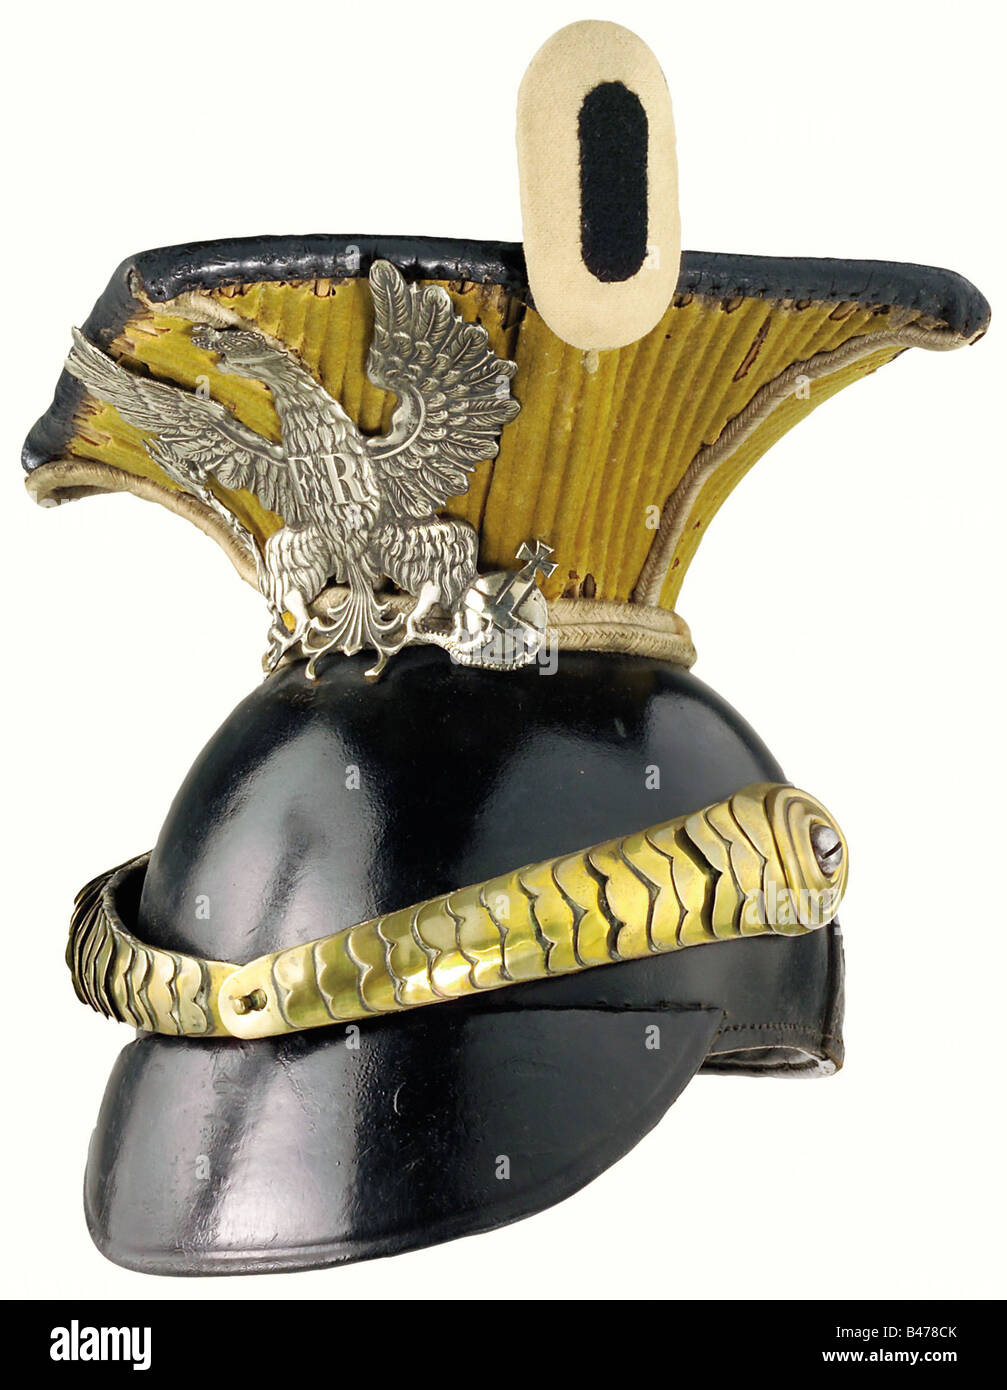 Prussia: A czapka of 1844 pattern for troopers, of the 2nd Brandenburg Uhlan Regiment No. 1. The skull is made of leather, the neck consists of a yellow sleeve over a frame of Spanish cane (with some defects), the piping is made of white cord. A silver eagle badge is mounted on the neck. Cambered chinscales are secured to a black/red/gold cockade. Black leather liner showing signs of wear and ageing. Size 54. historic, historical, 19th century, helmet, helmets, headpiece, headpieces, object, objects, stills, clipping, clippings, cut out, cut-out, cut-outs, Stock Photo